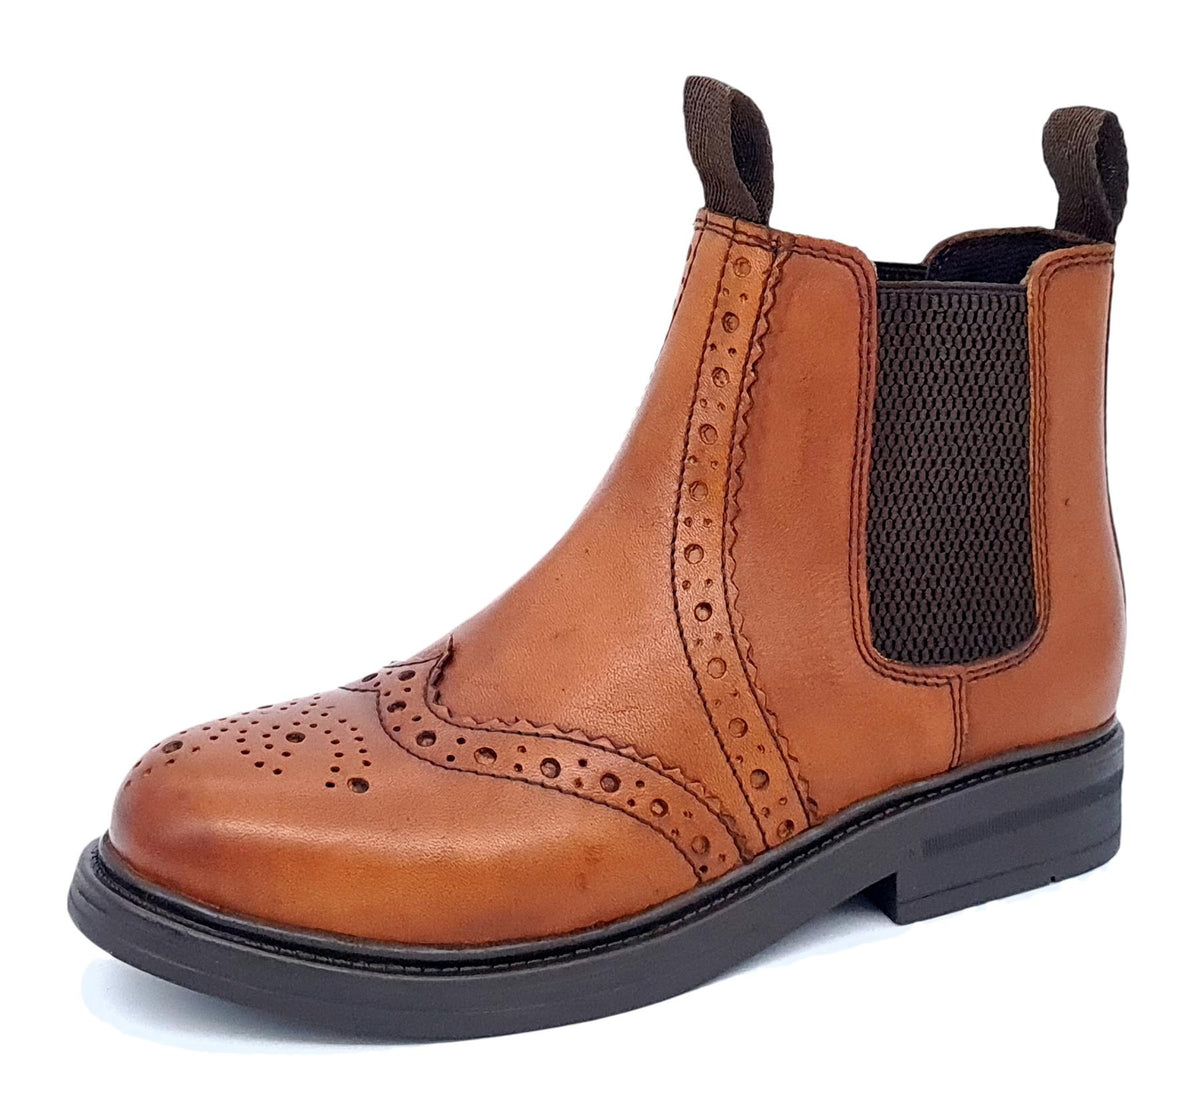 Frank James Wrexham Kids Leather Pull On Brogue Chelsea Boots